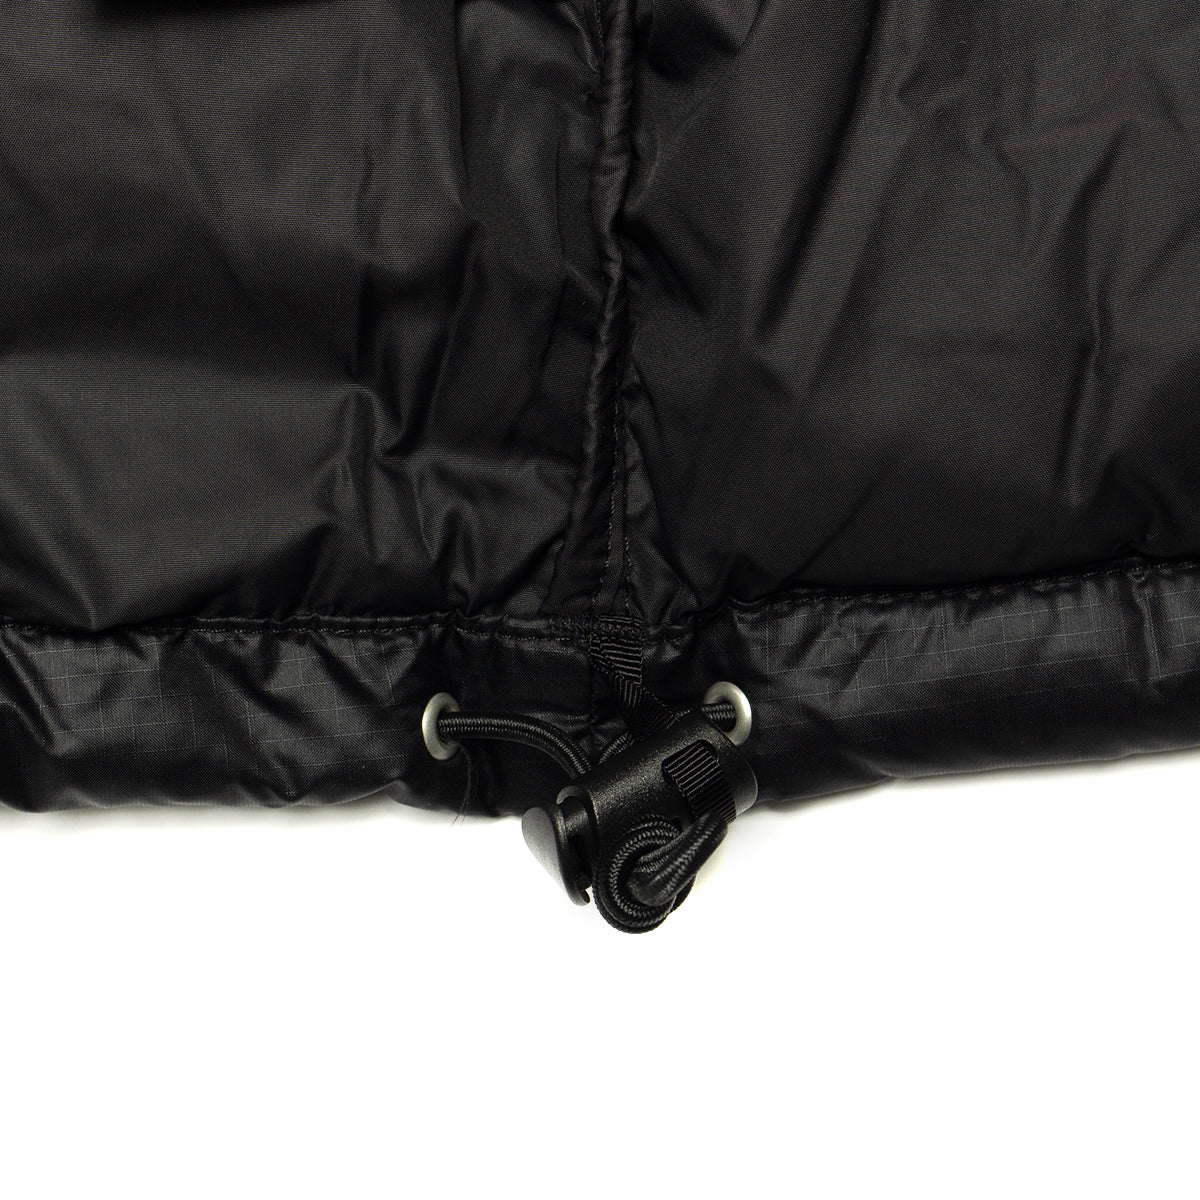 The North Face | 1996 Retro Nuptse Jacket Style # NF0A3C8D4G31 Color : TNF Black